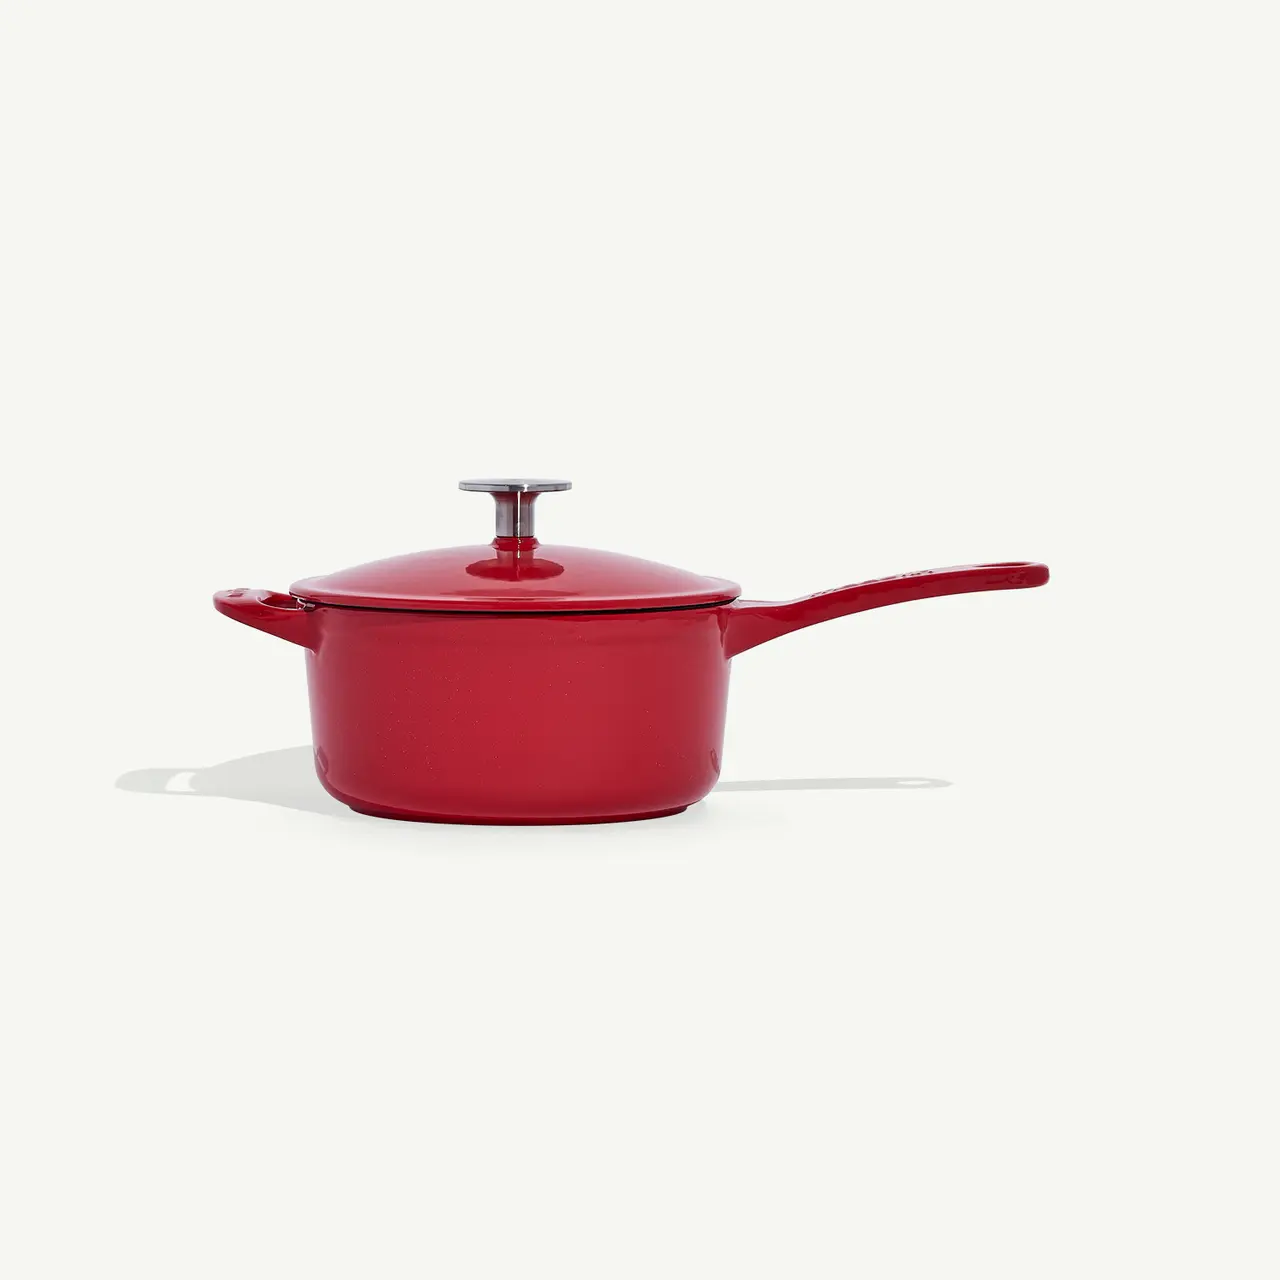 A red saucepan with a matching lid and a long handle is centered on a plain white background.